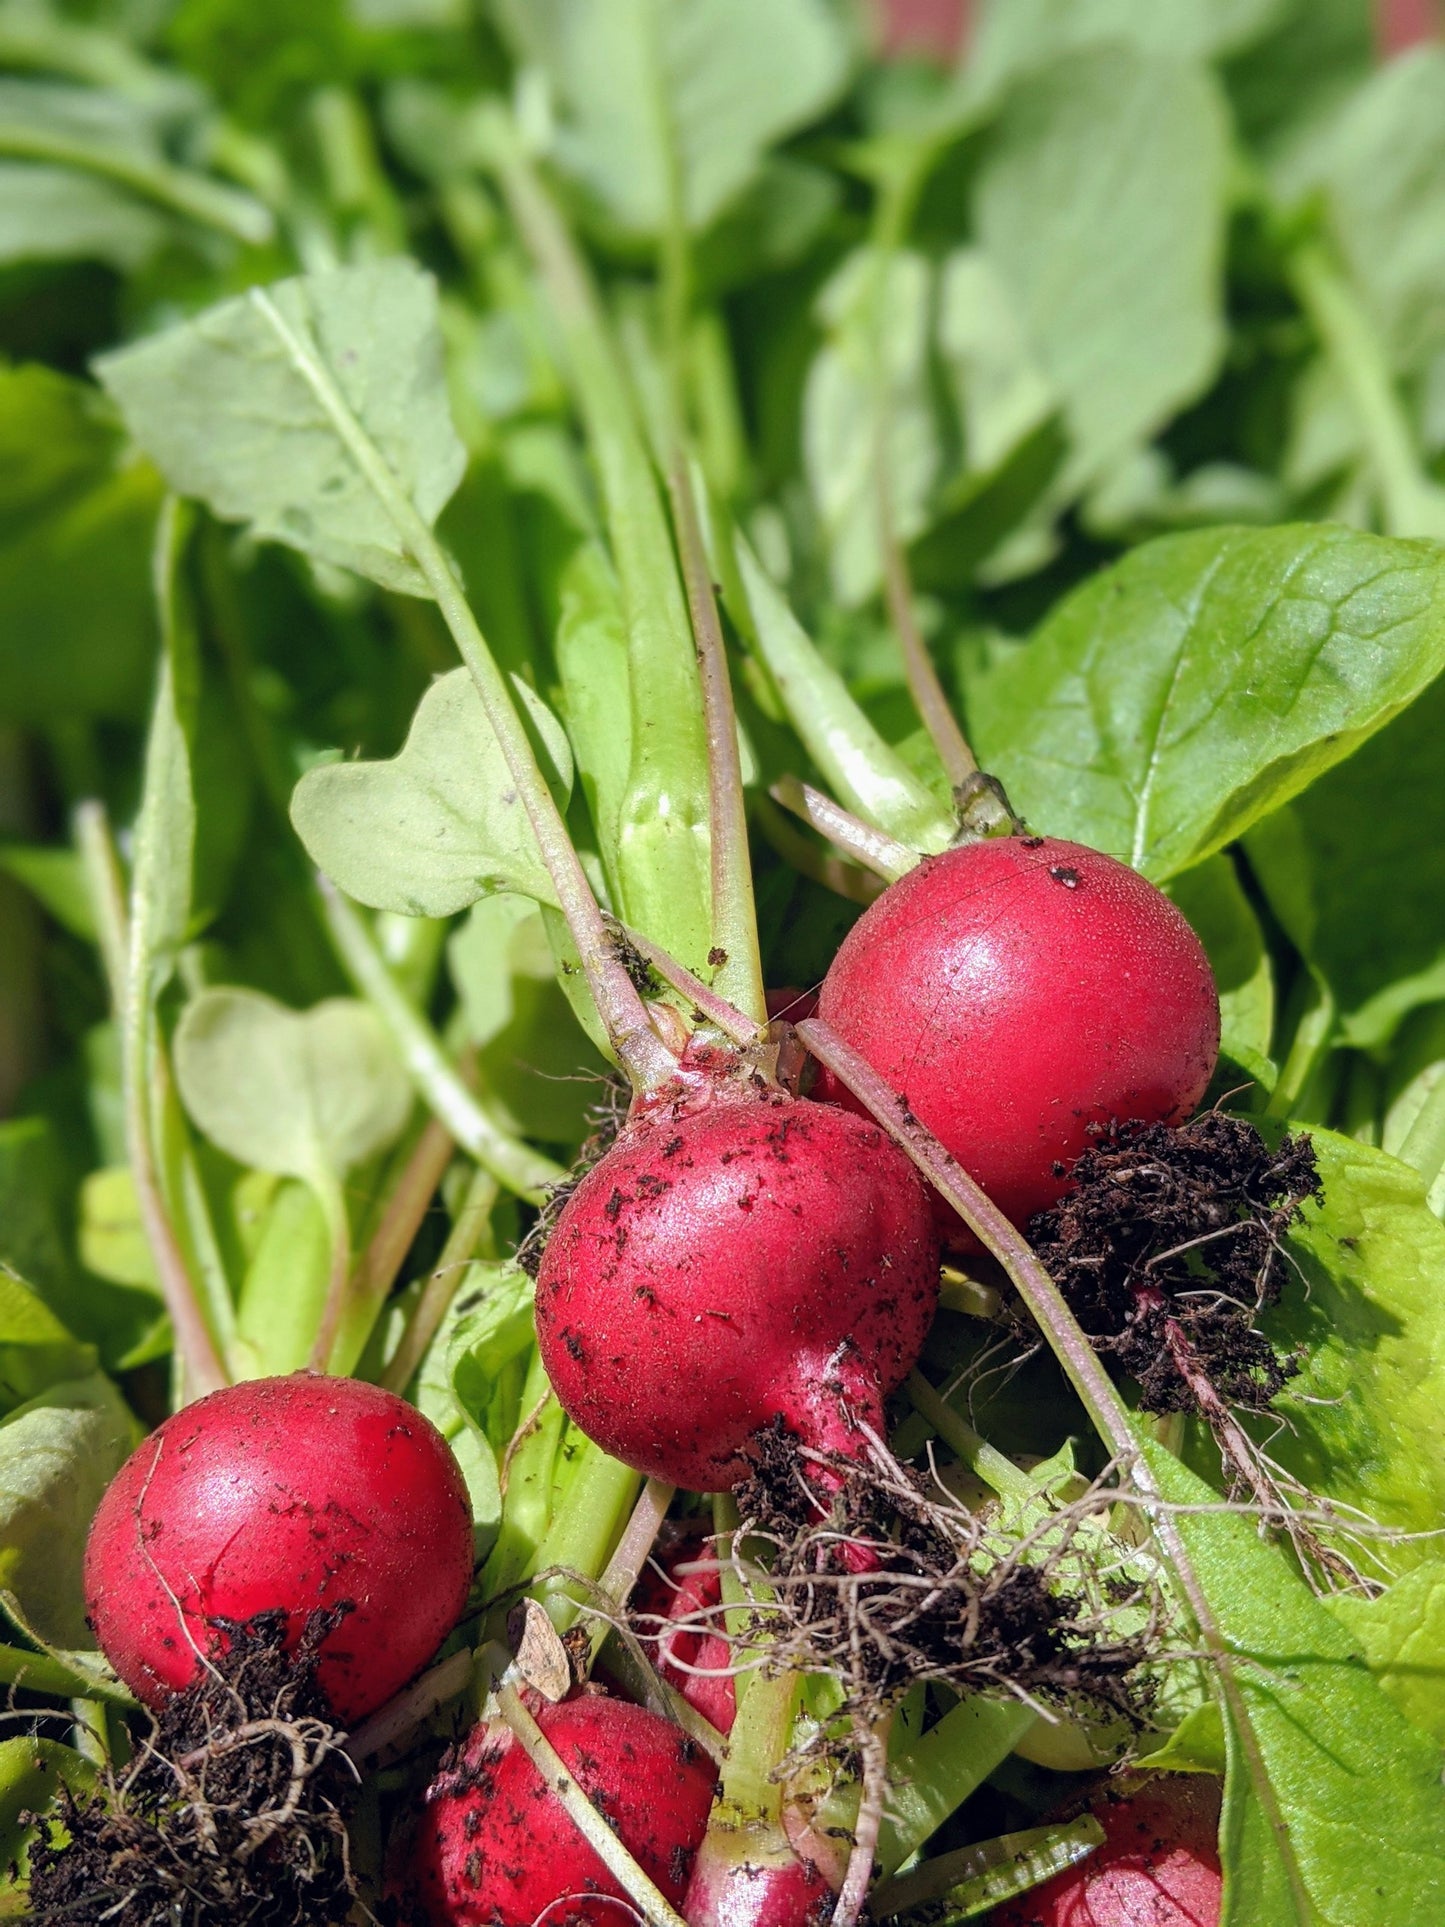 On display are several radishes, of the variety Champion. The radish appear to be freshly plucked from the ground, possibly inches above the surface. However, the image is zoomed and we cannot see what resides below the radishes. Visible are clumps of dirt, to be expected as they pulled from the ground. 